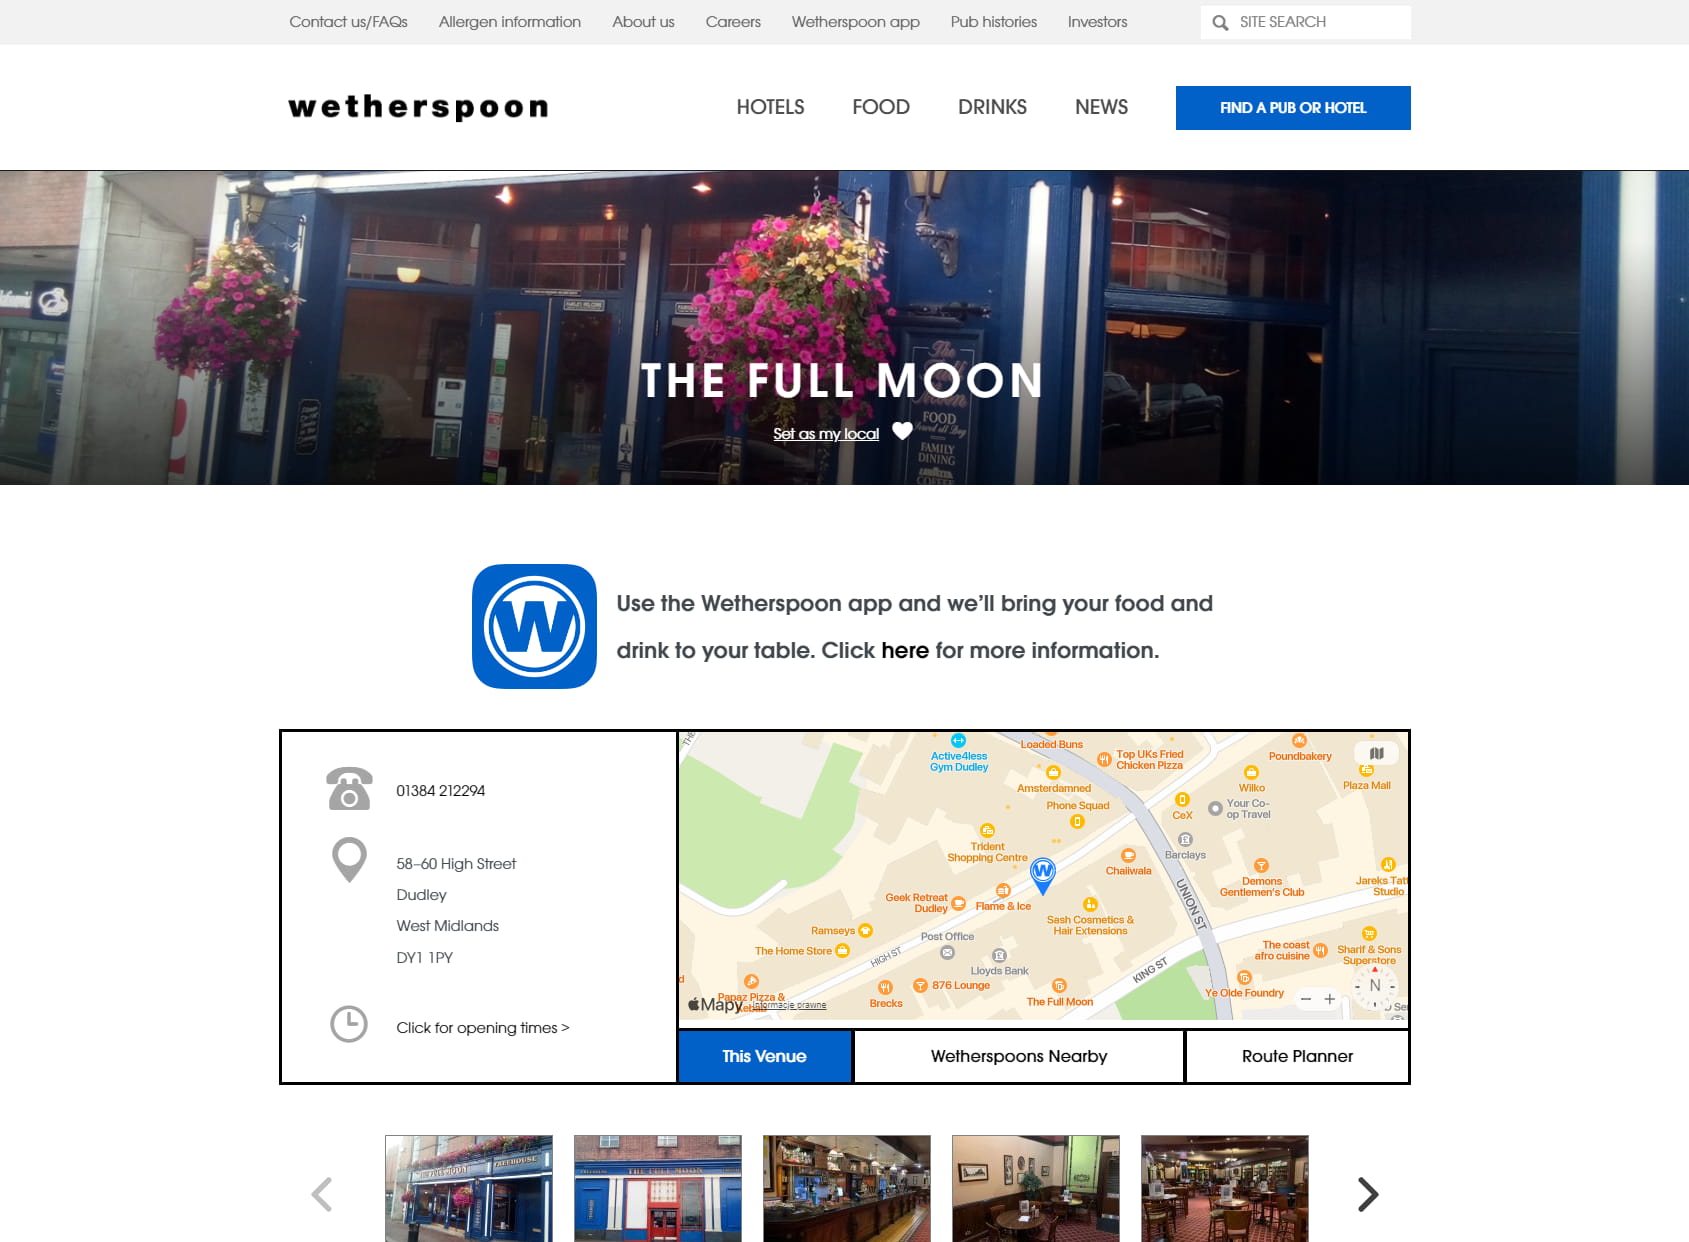 The Full Moon - JD Wetherspoon